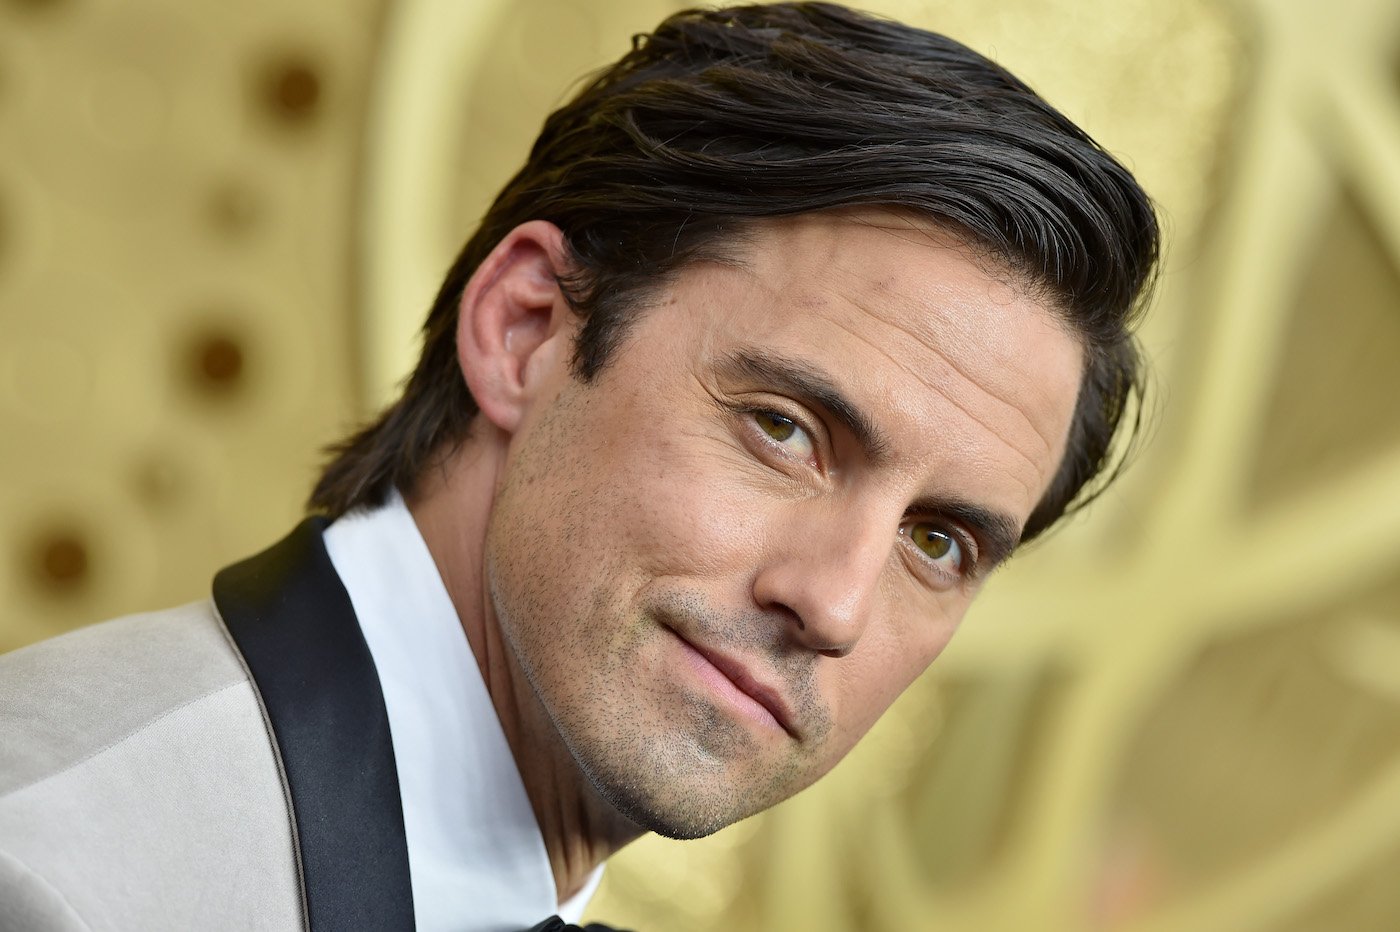 Milo Ventimiglia arrives at the 2019 Emmy Awards